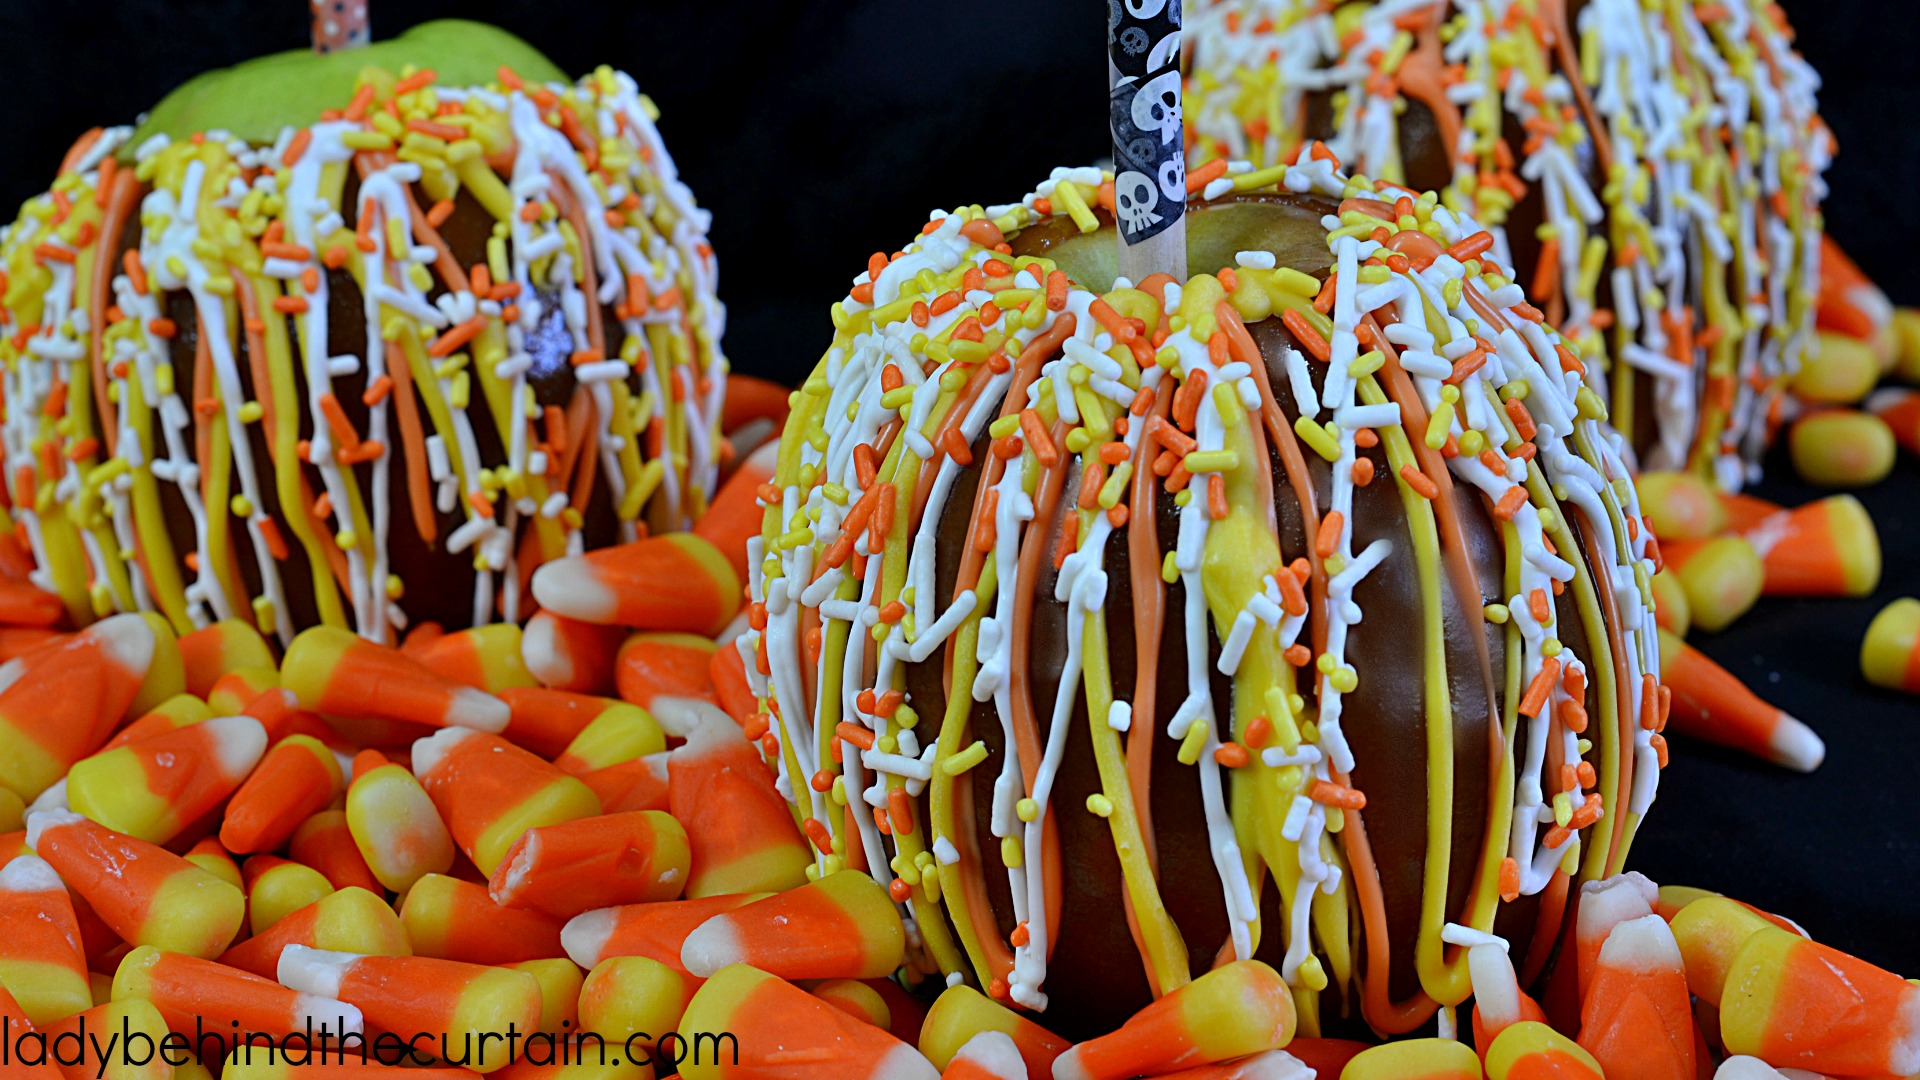 Candy Corn Caramel Apples | Your favorite apple dipped in easy to make caramel and drizzled with festive candy melts plus candy corn colored sprinkles! Perfect for your Halloween Party, Carnival or Fall Festival!